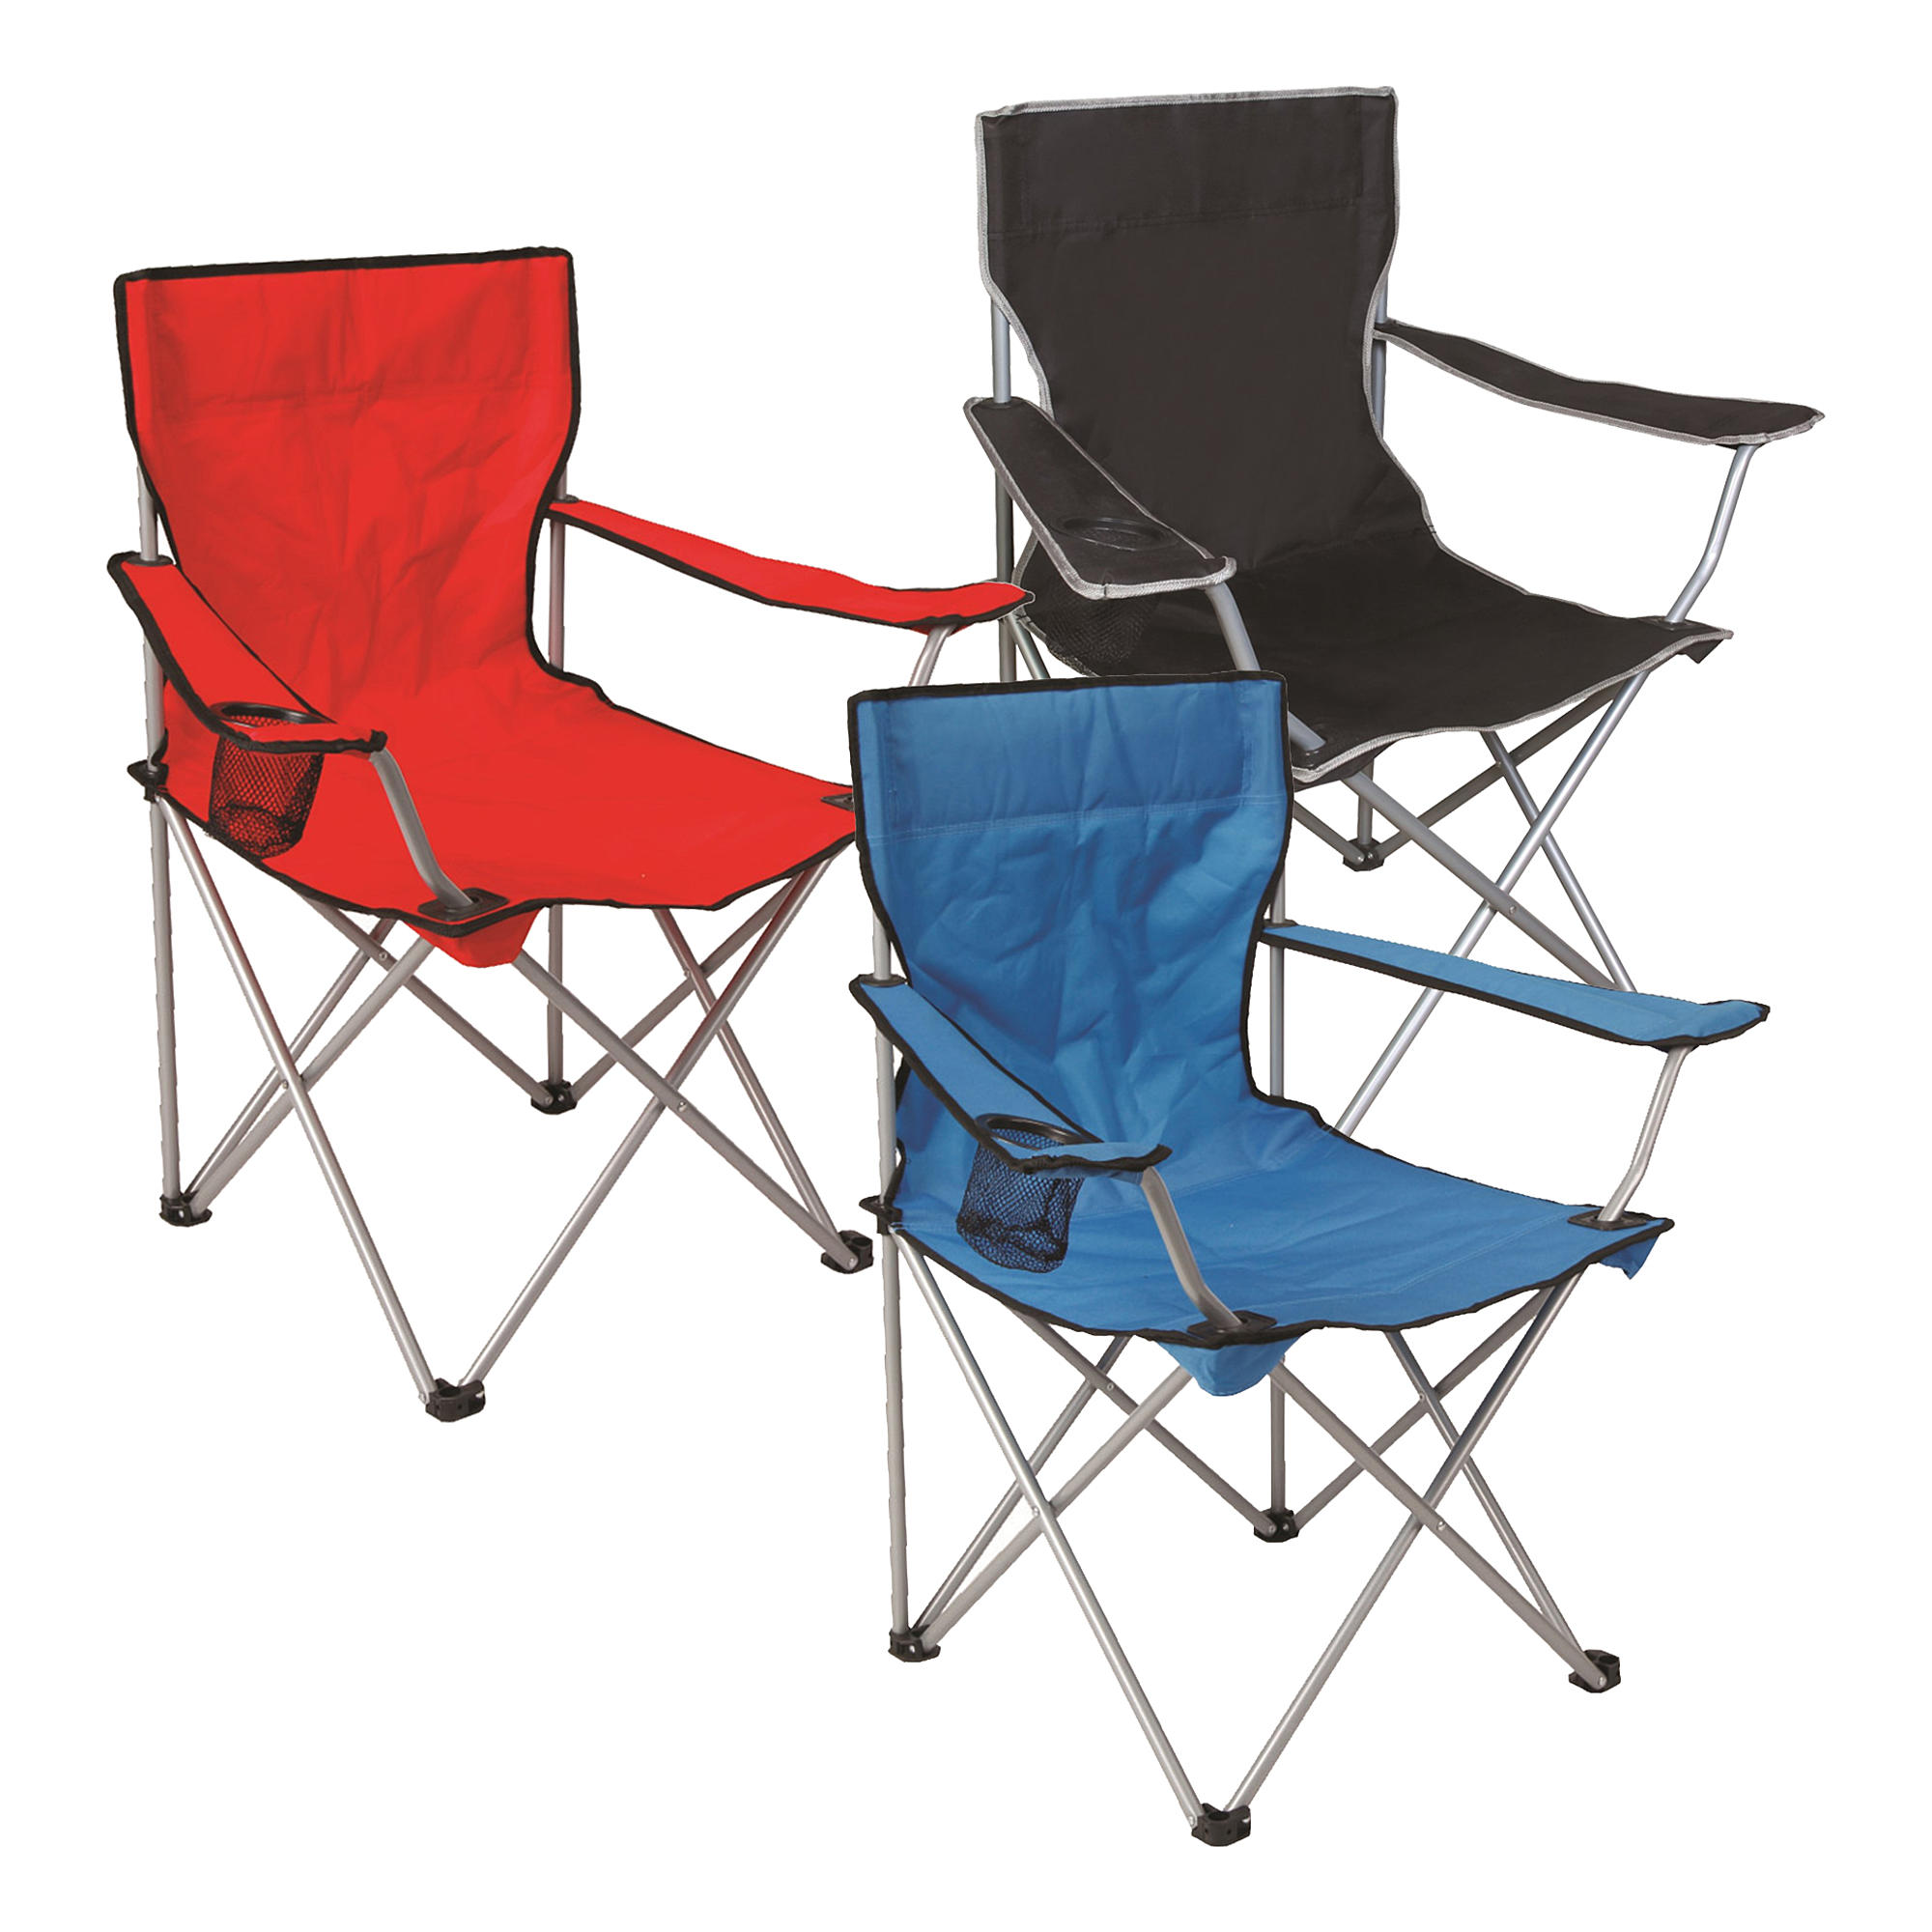 In-store: Northwest Territory lightweight sports chair for $8